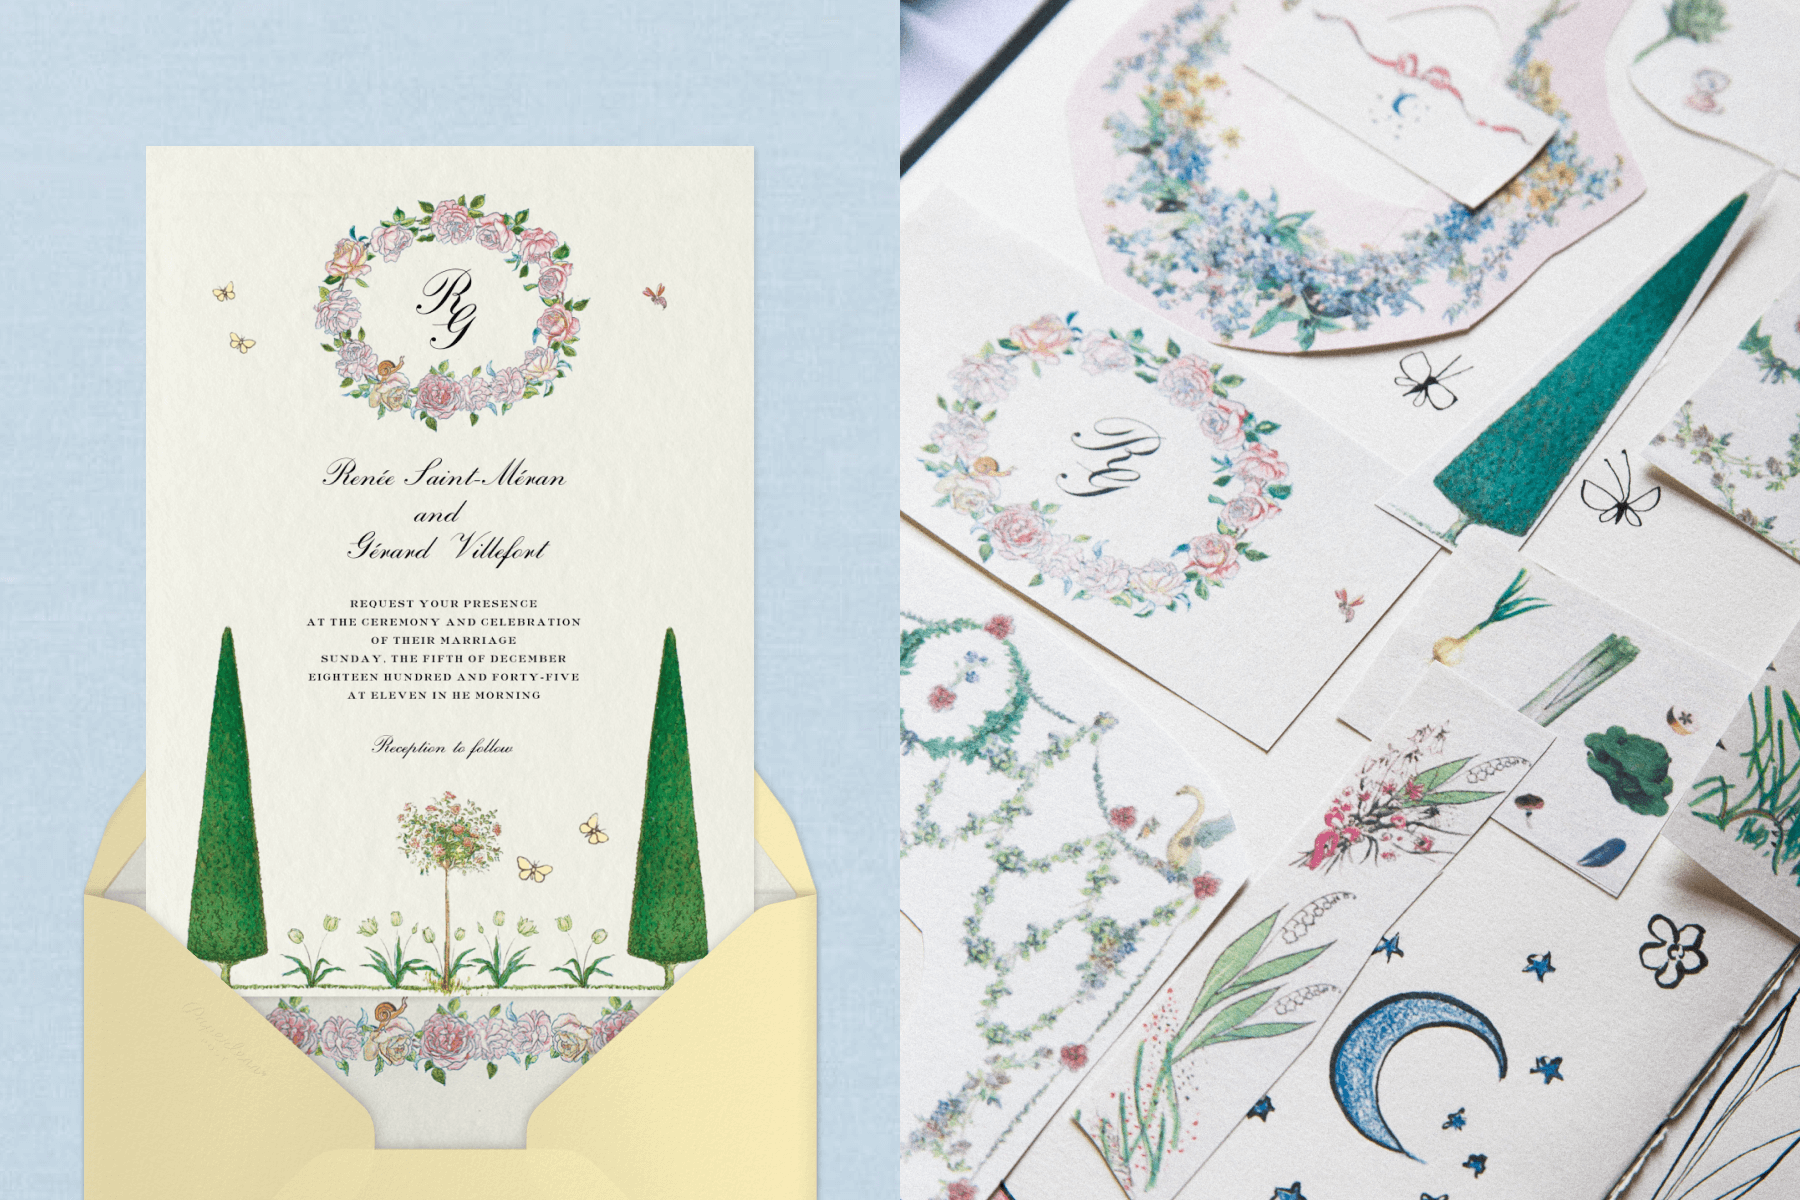 Left: A Stephanie Fishwick wedding invitation with a floral wreath and two trees; Right: Several pieces of paper with drawings and calligraphy.